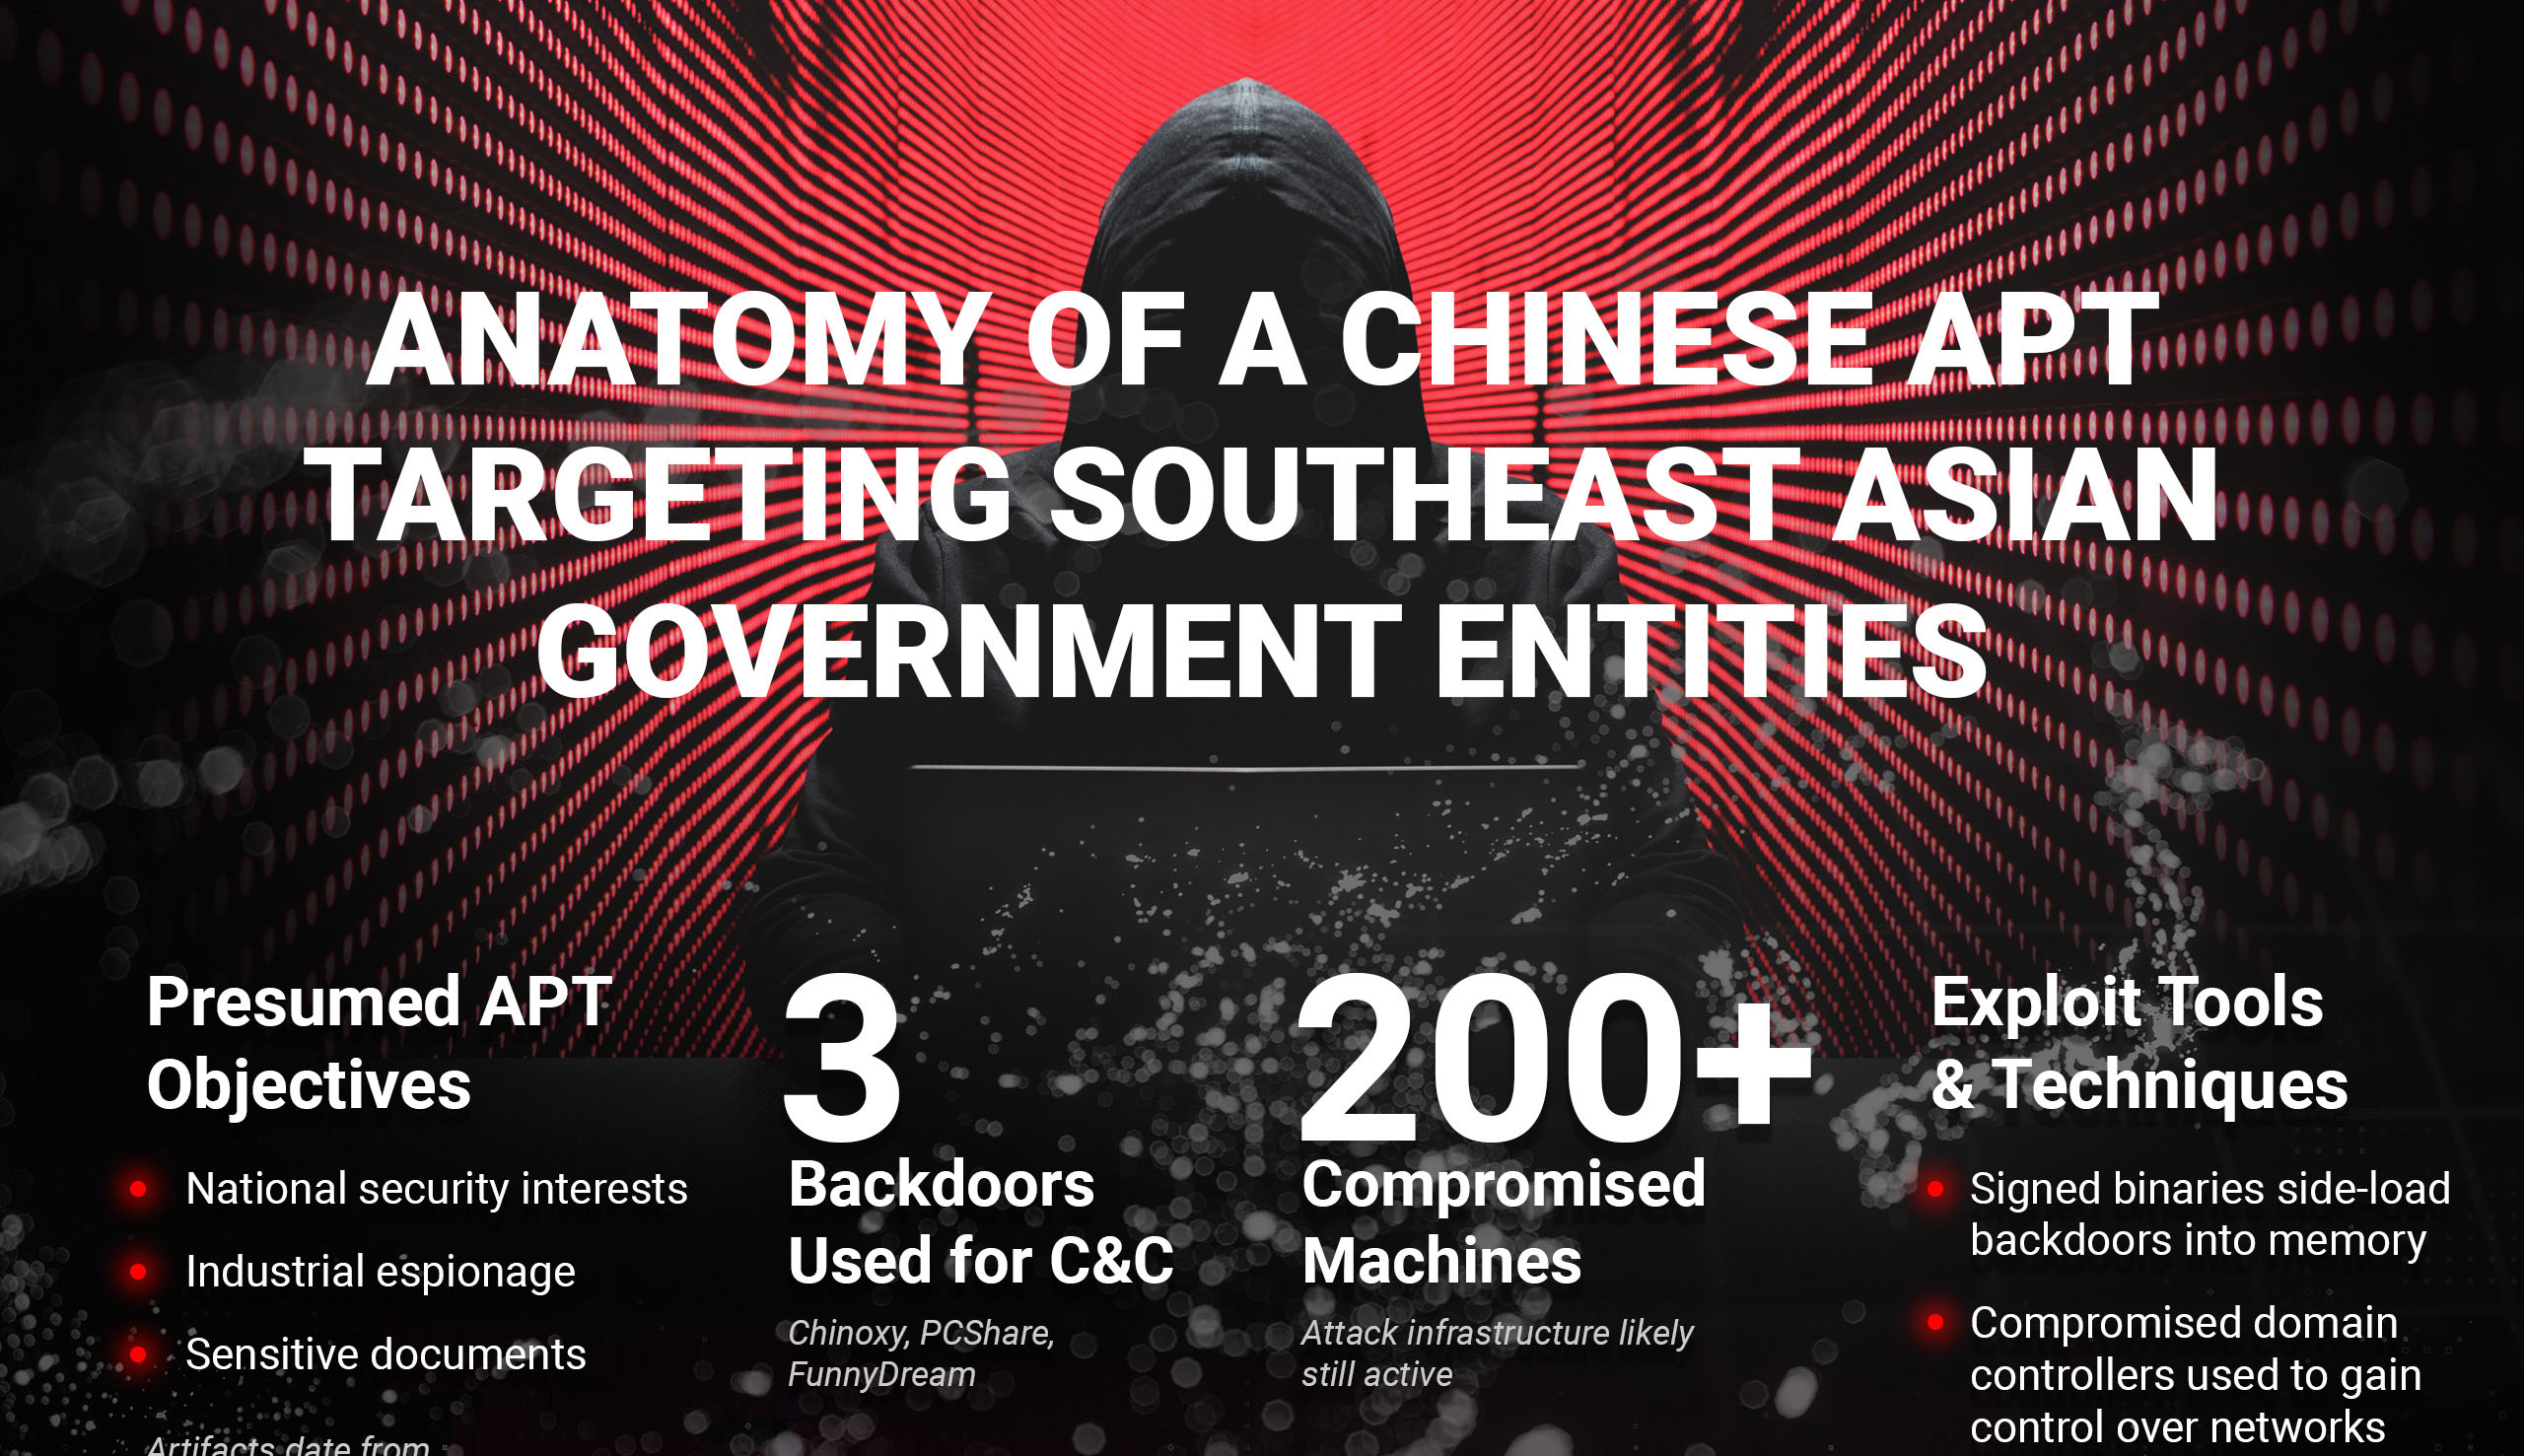 How They Did It: New Infographic Dissects Complete Chinese APT Attack Cycle